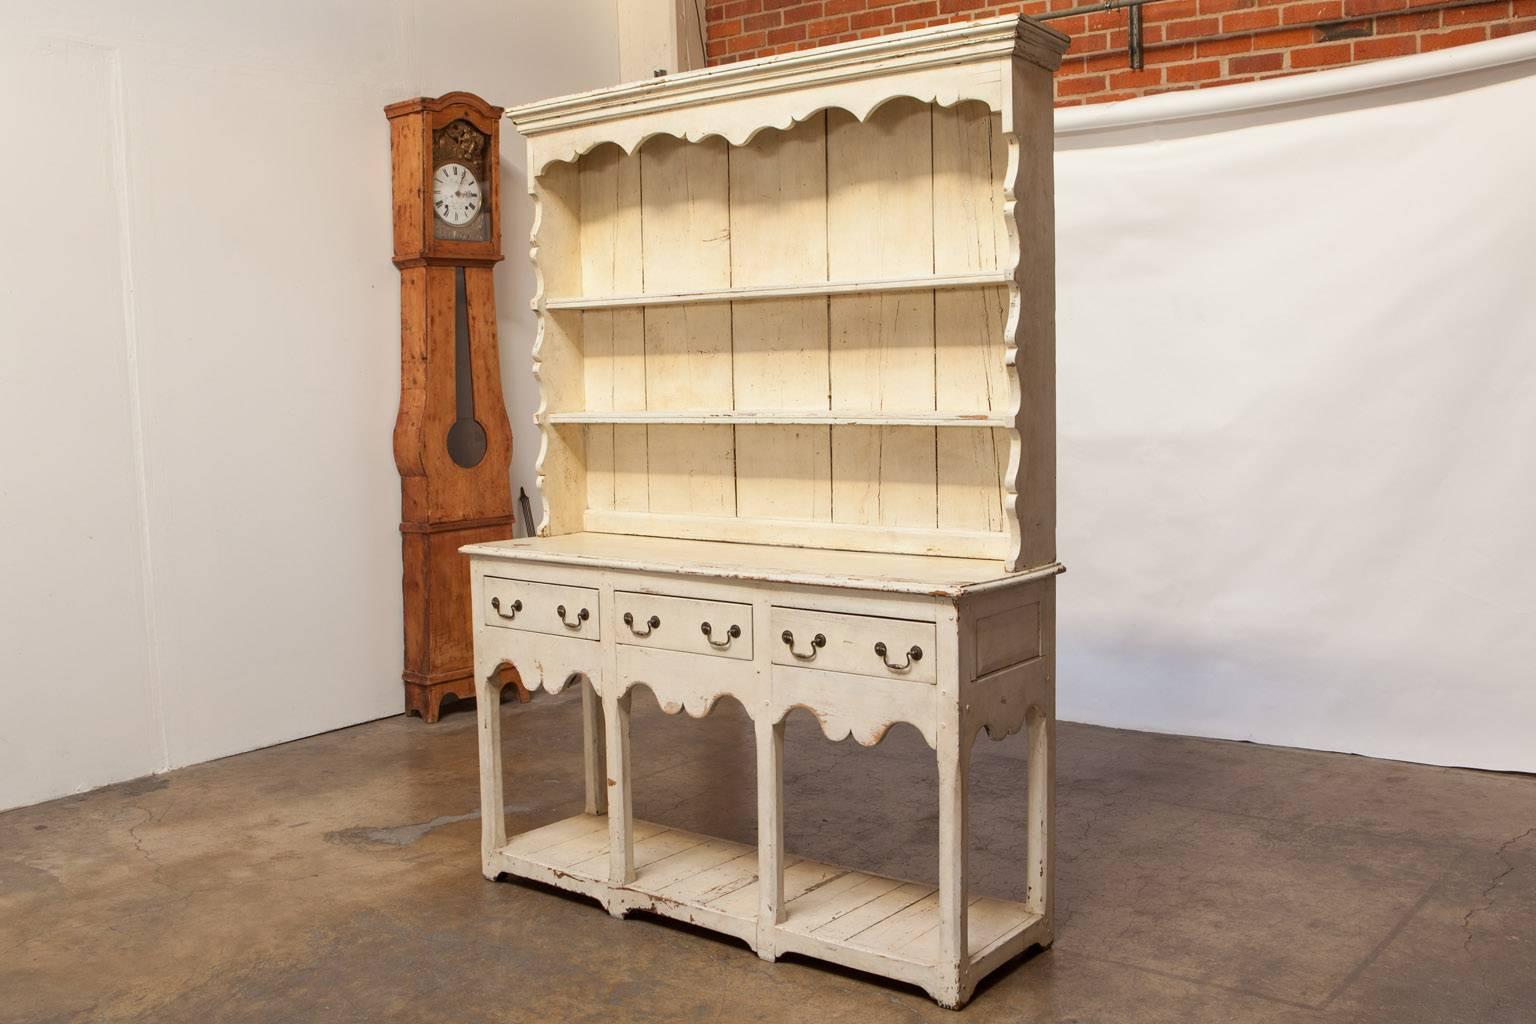 Rare Welsh dresser with a pot board base and an upper section having a molded cornice above a two shelf rack. The lower section is fronted by three drawers and a shaped apron. Supported by chamfered straight legs. The cupboard is constructed with